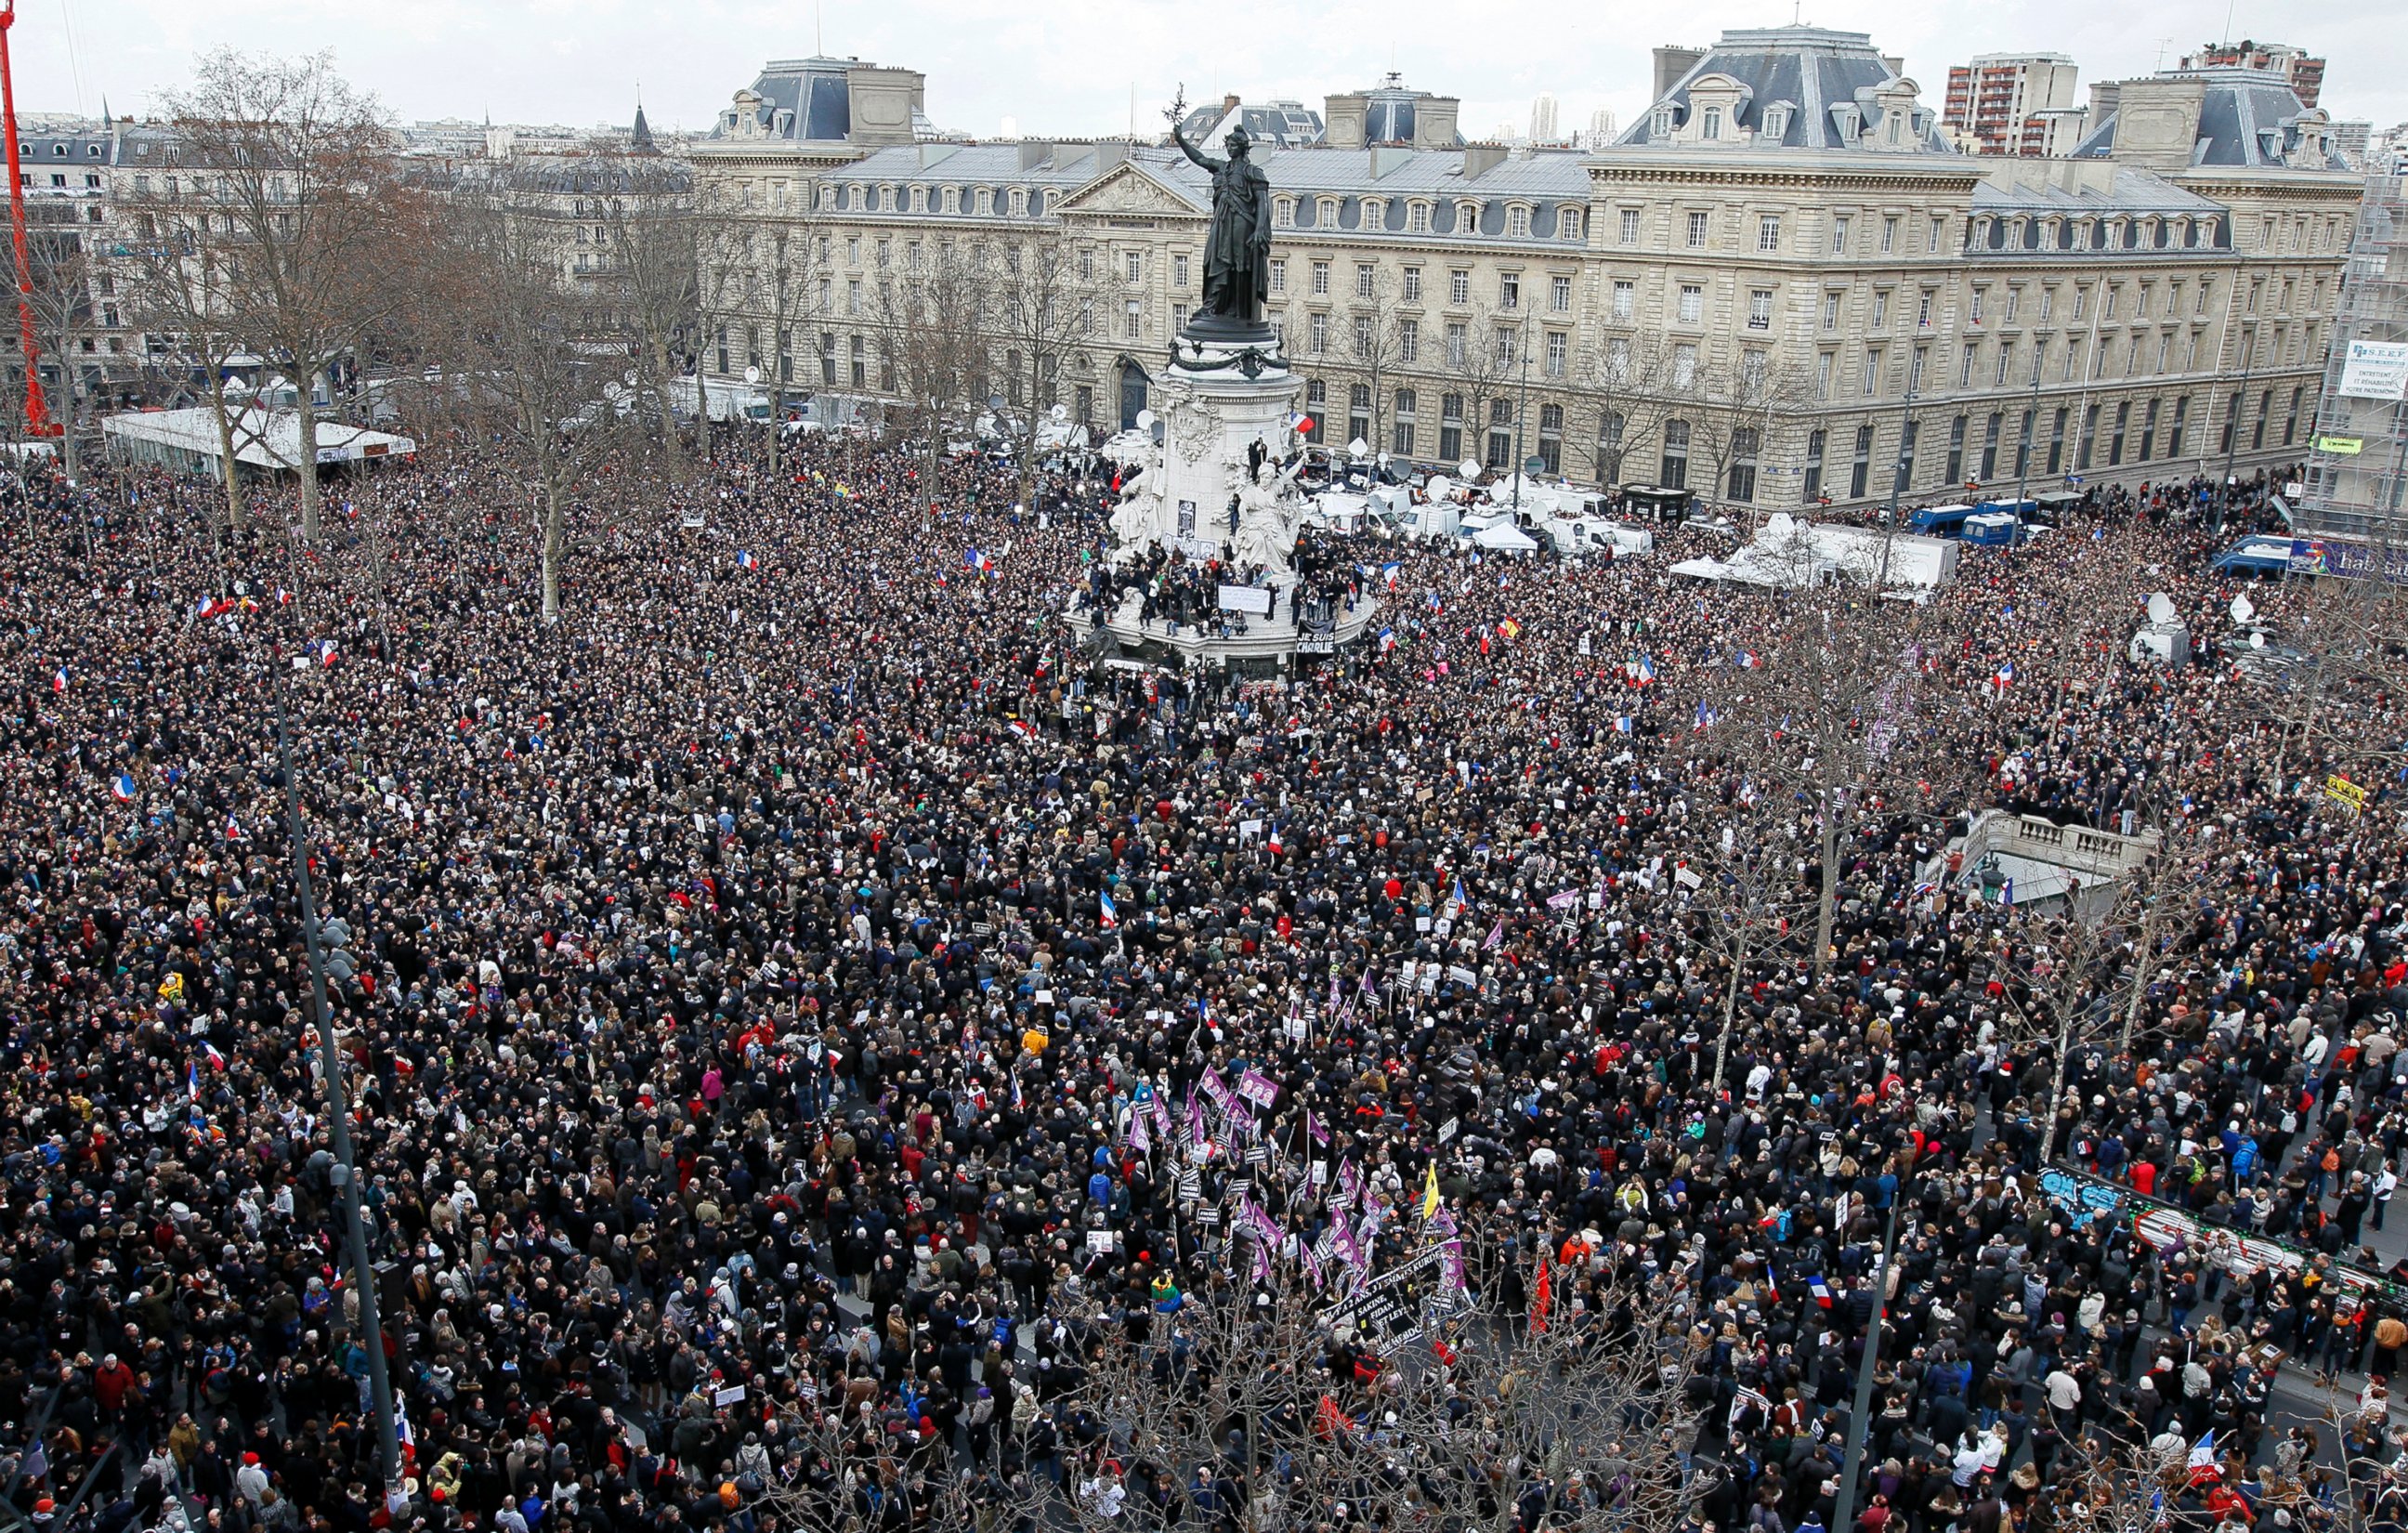 PHOTO: A general view shows Hundreds of thousands of people gathering on the Place de la Republique to attend the solidarity march (Rassemblement Republicain) in the streets of Paris, Jan. 11, 2015. 